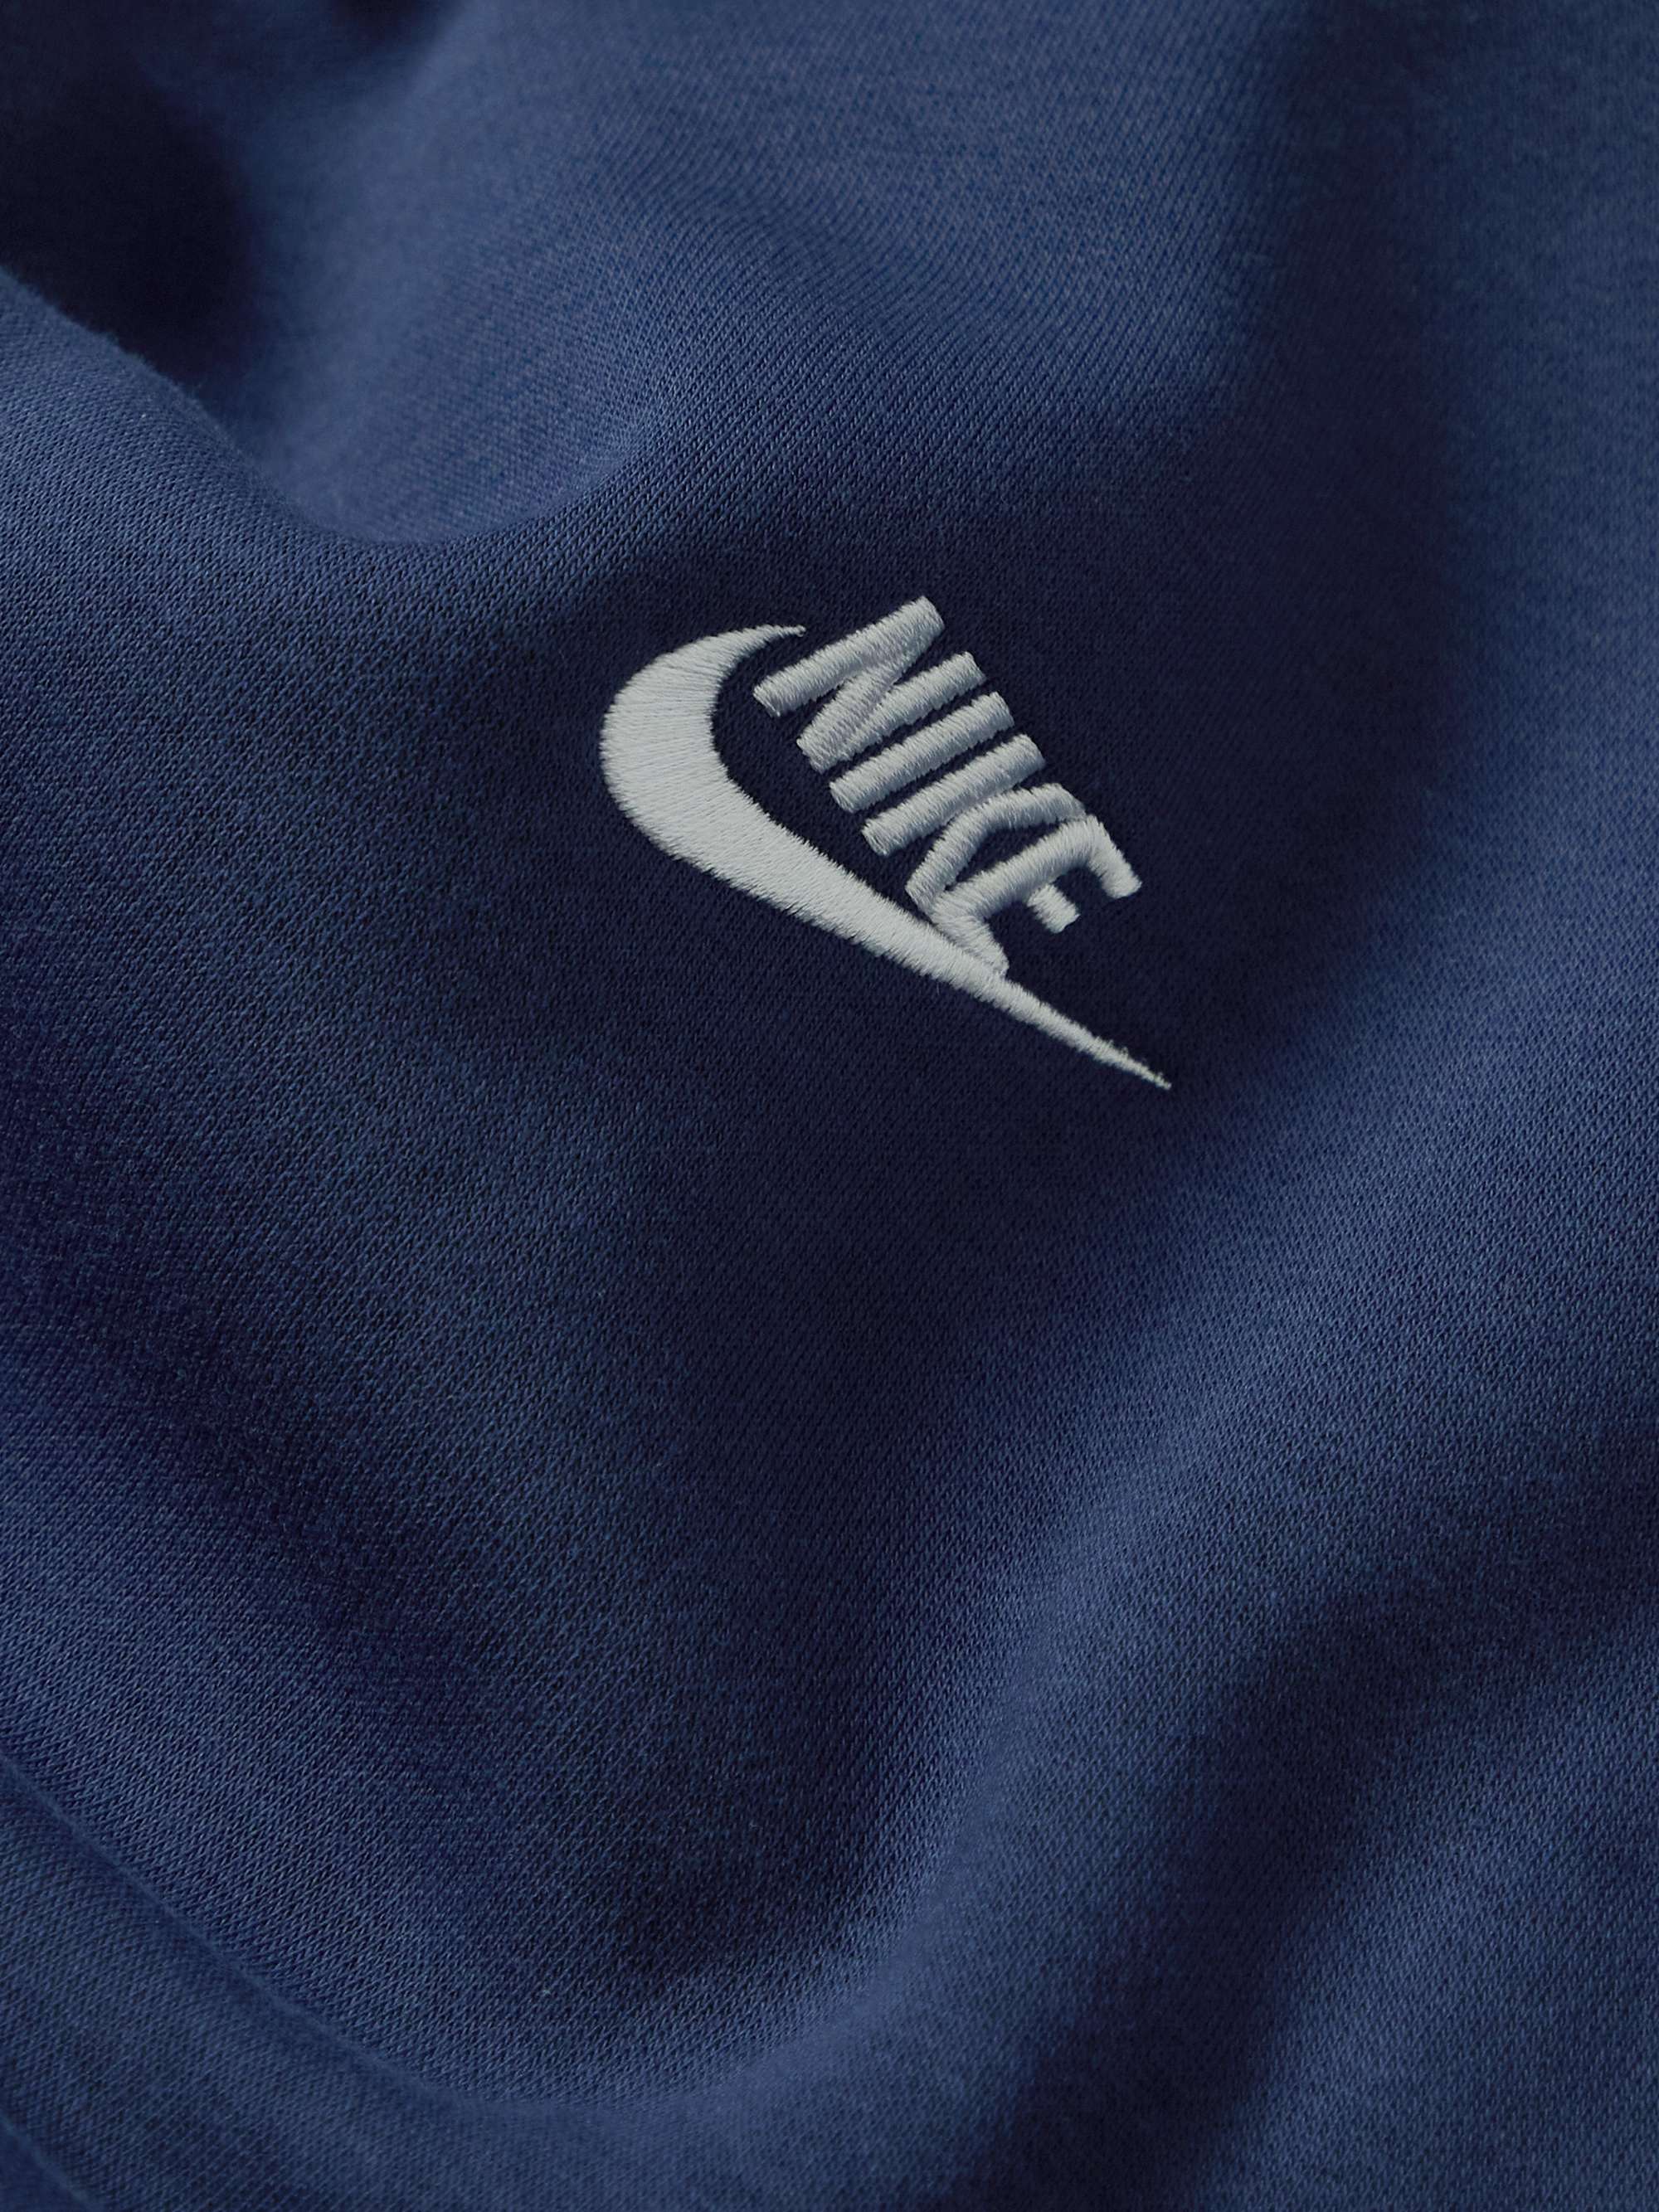 NIKE Club Logo-Embroidered Cotton-Blend Jersey Hoodie